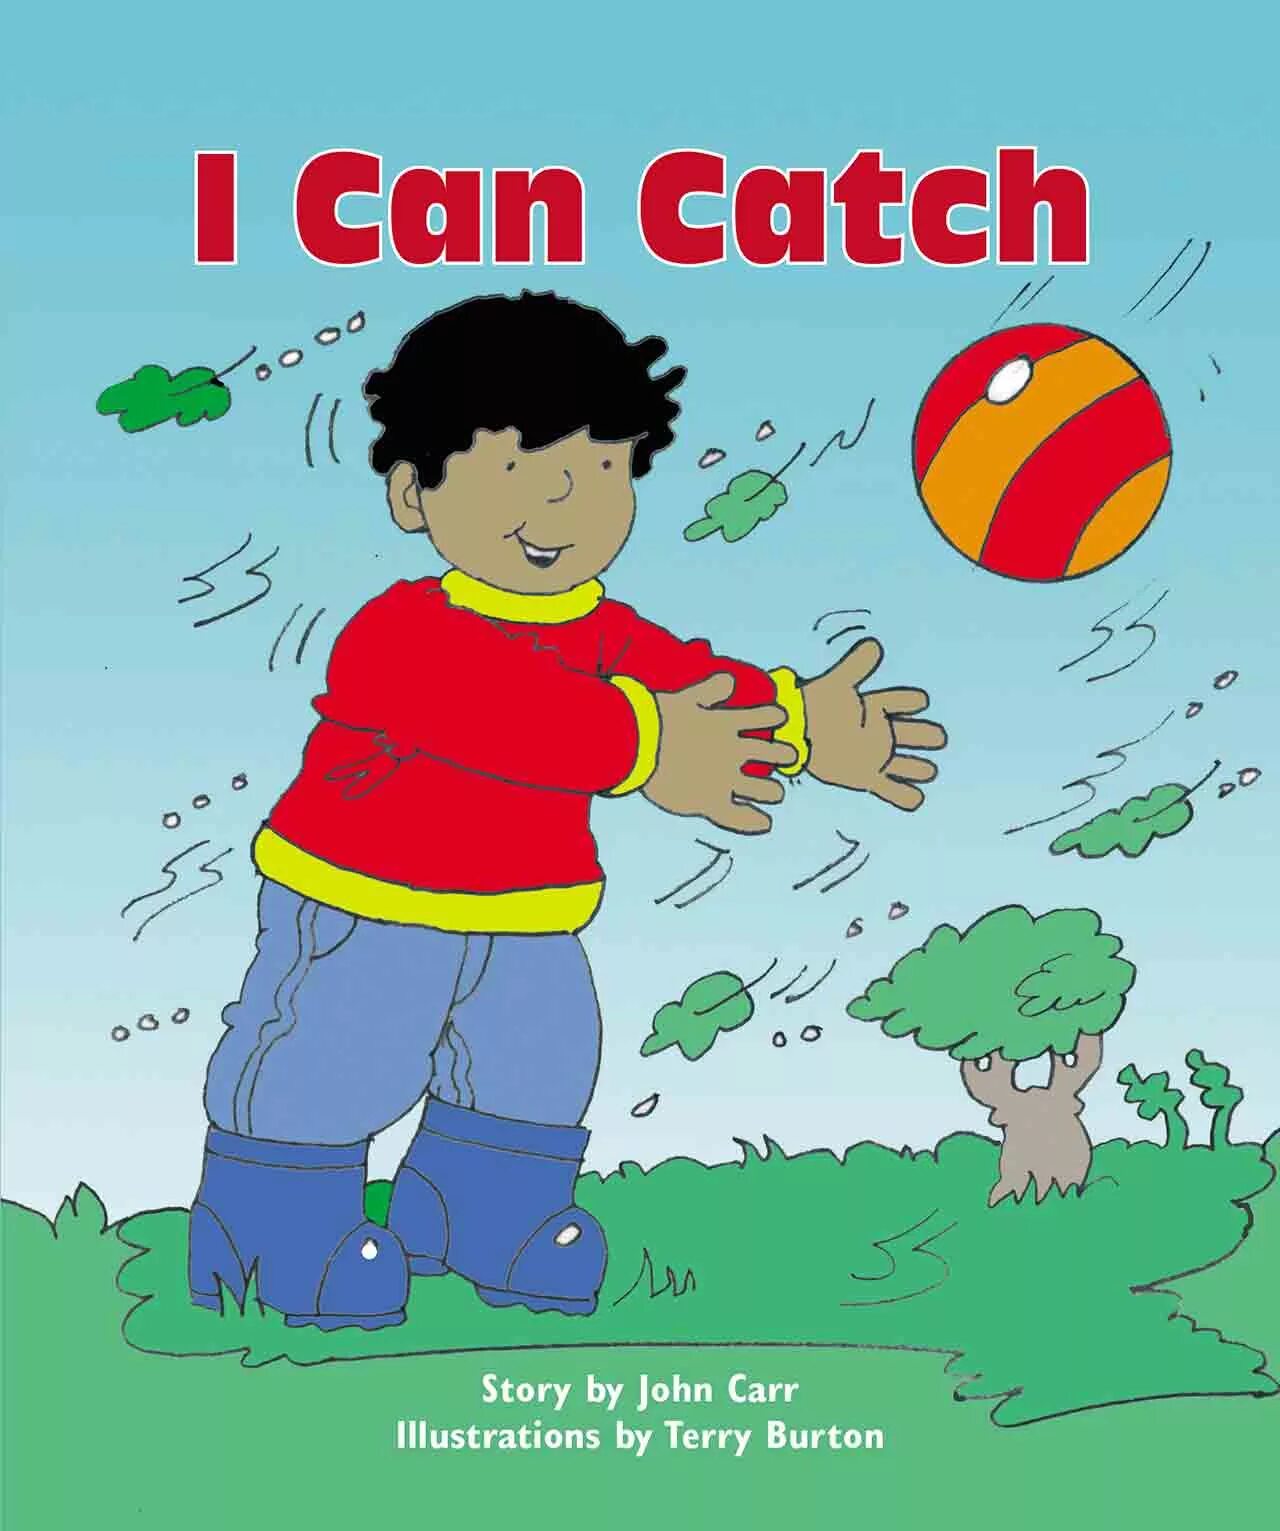 Catch can. To catch. We can catch. Catch Flashcard.